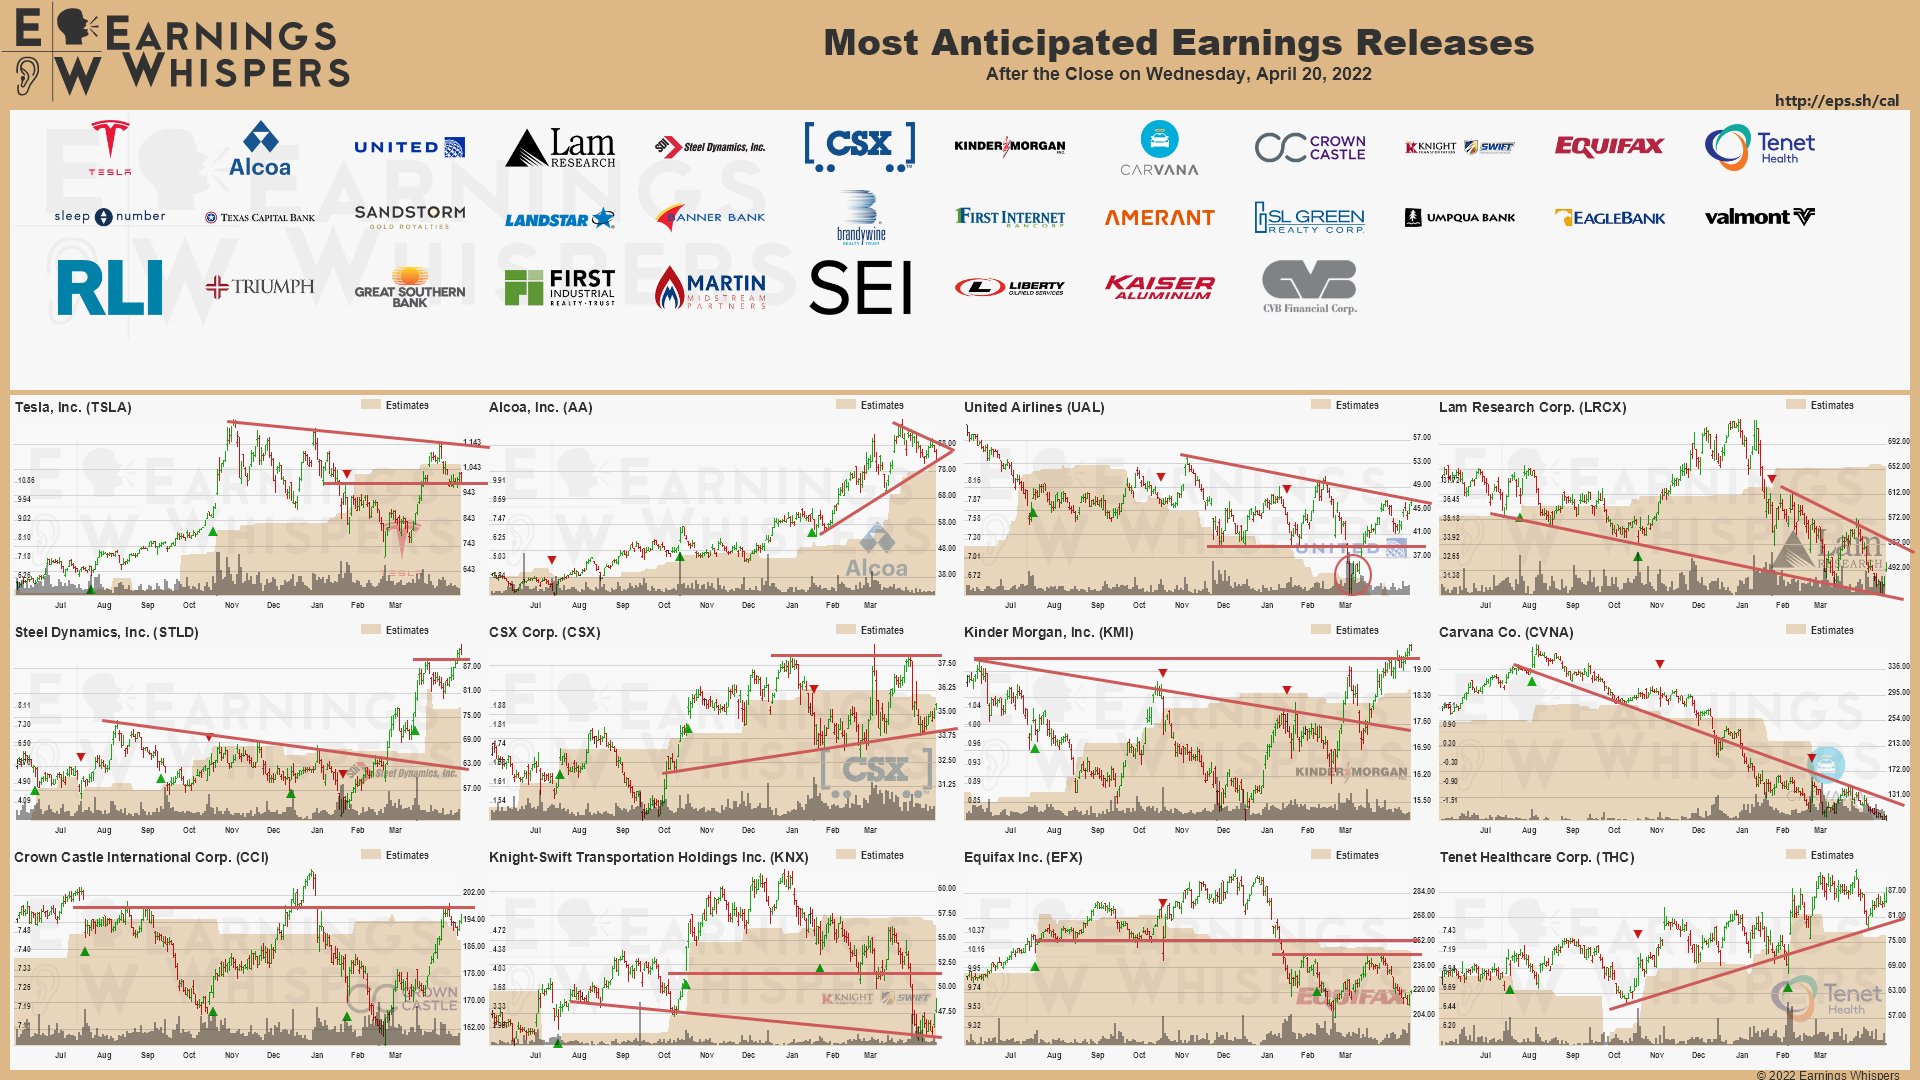 20220420 Earnings after